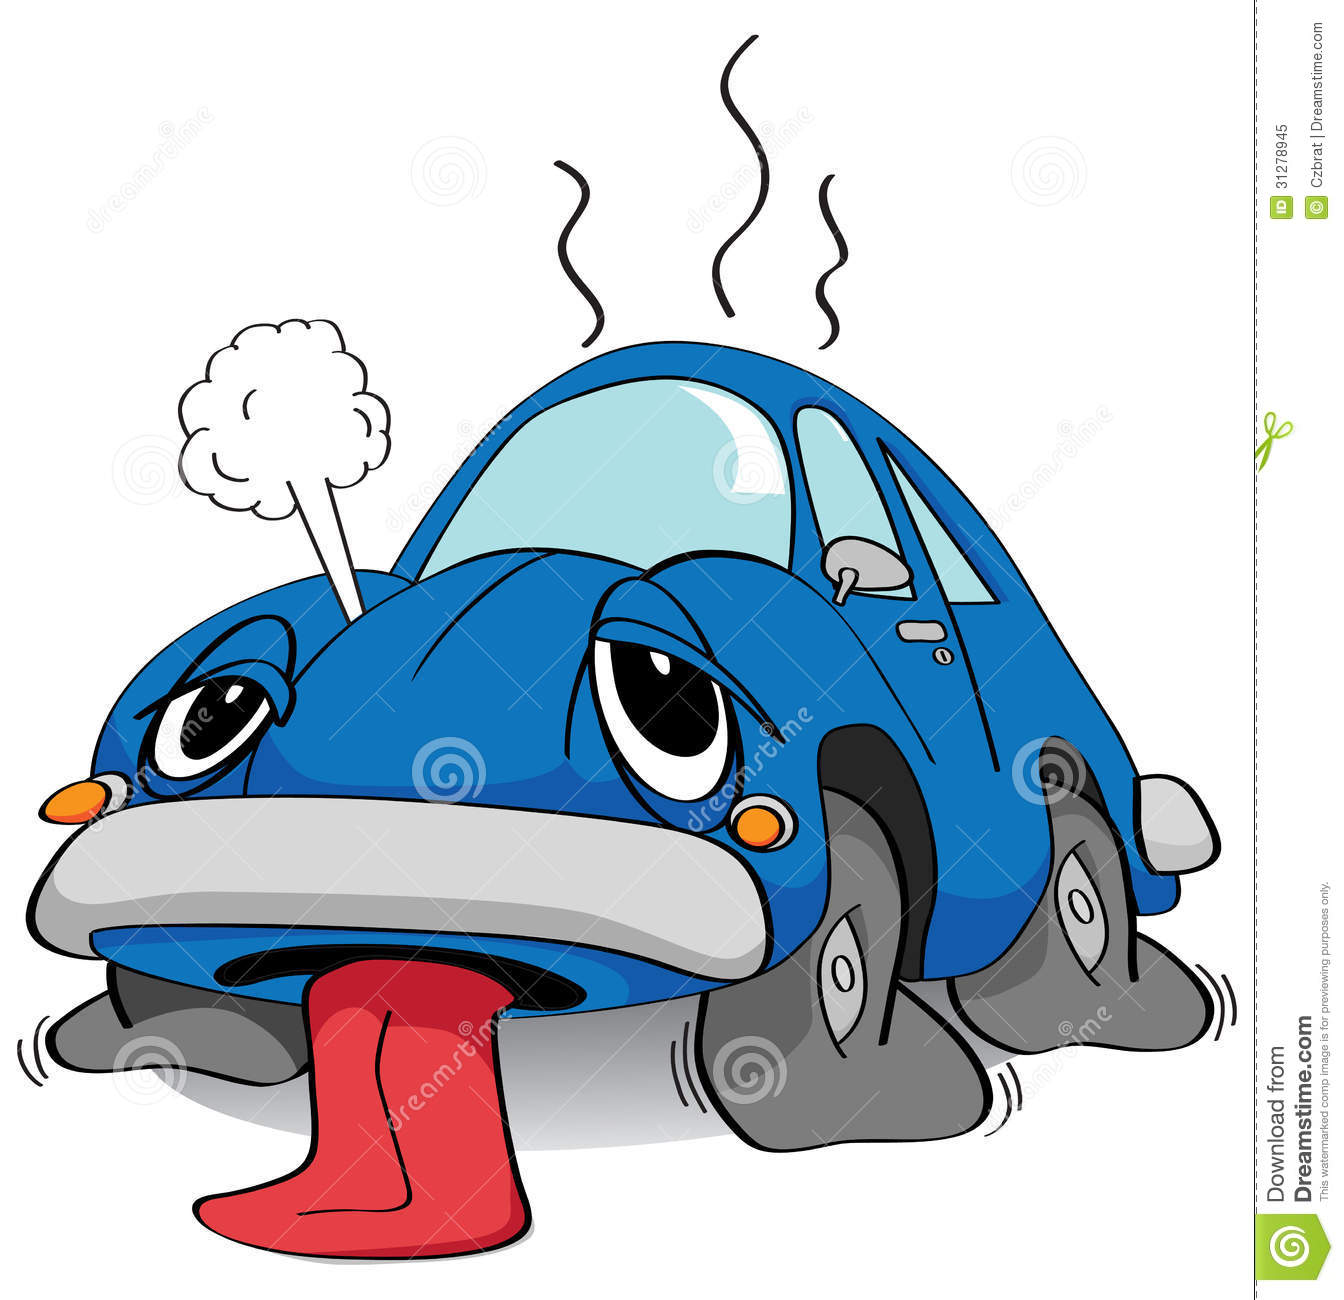 Tired Car Royalty Free Stock Photo   Image  31278945